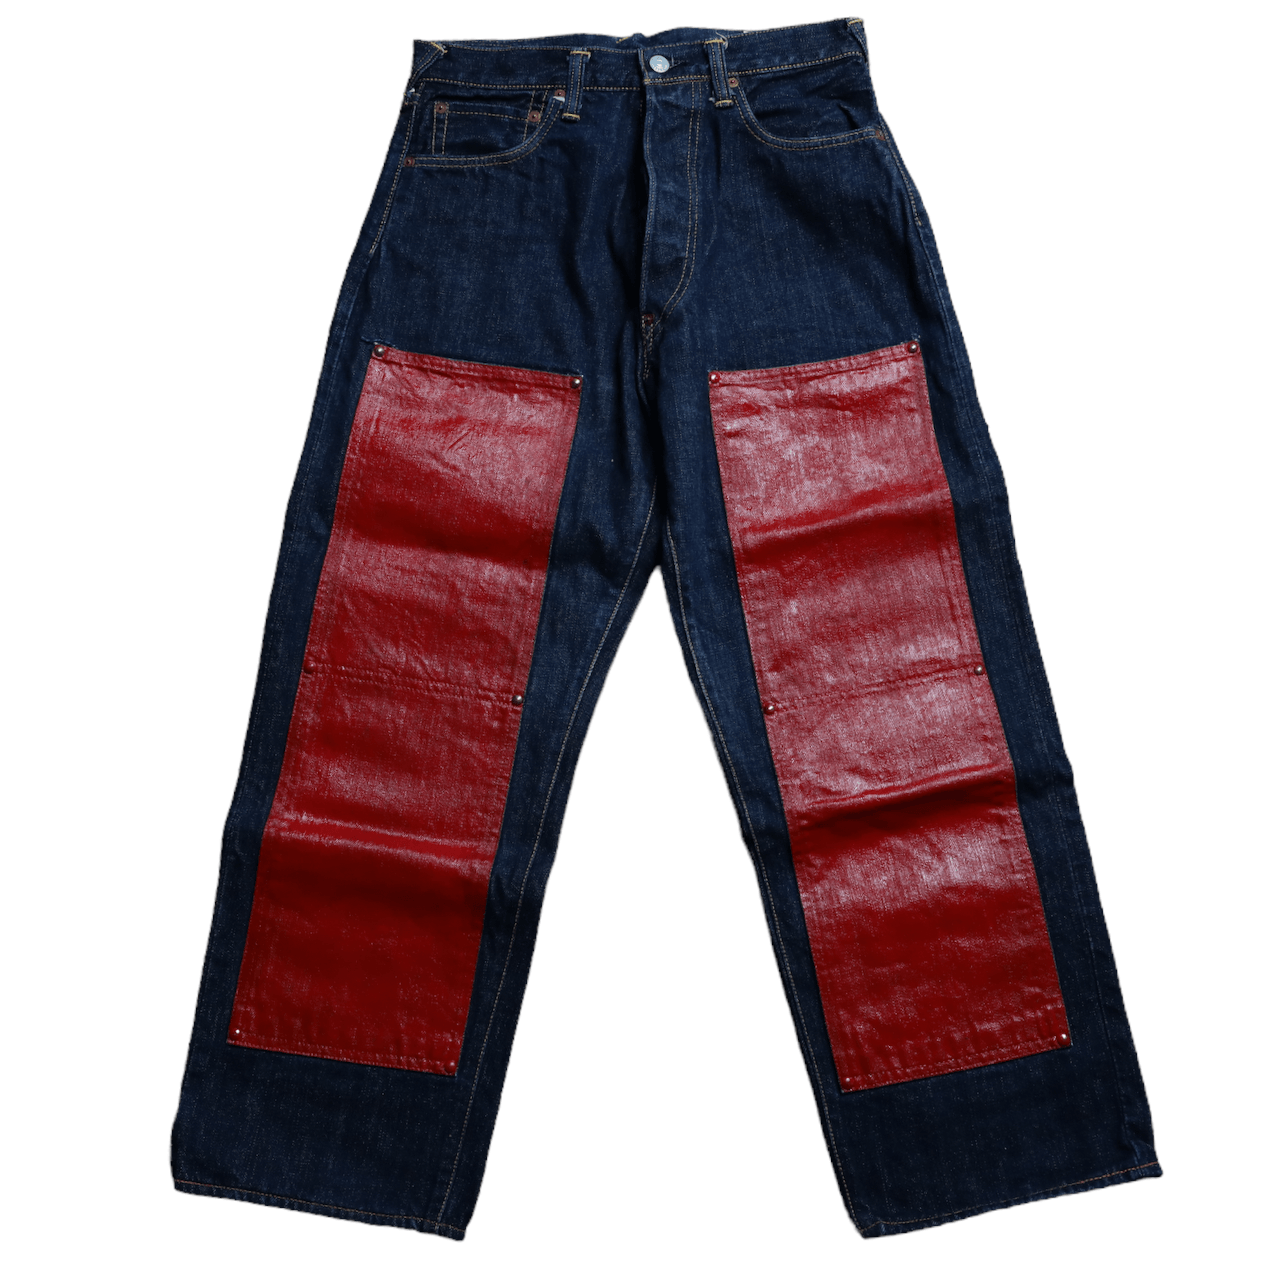 Evisu Red front and back Dicock Jeans - Known Source